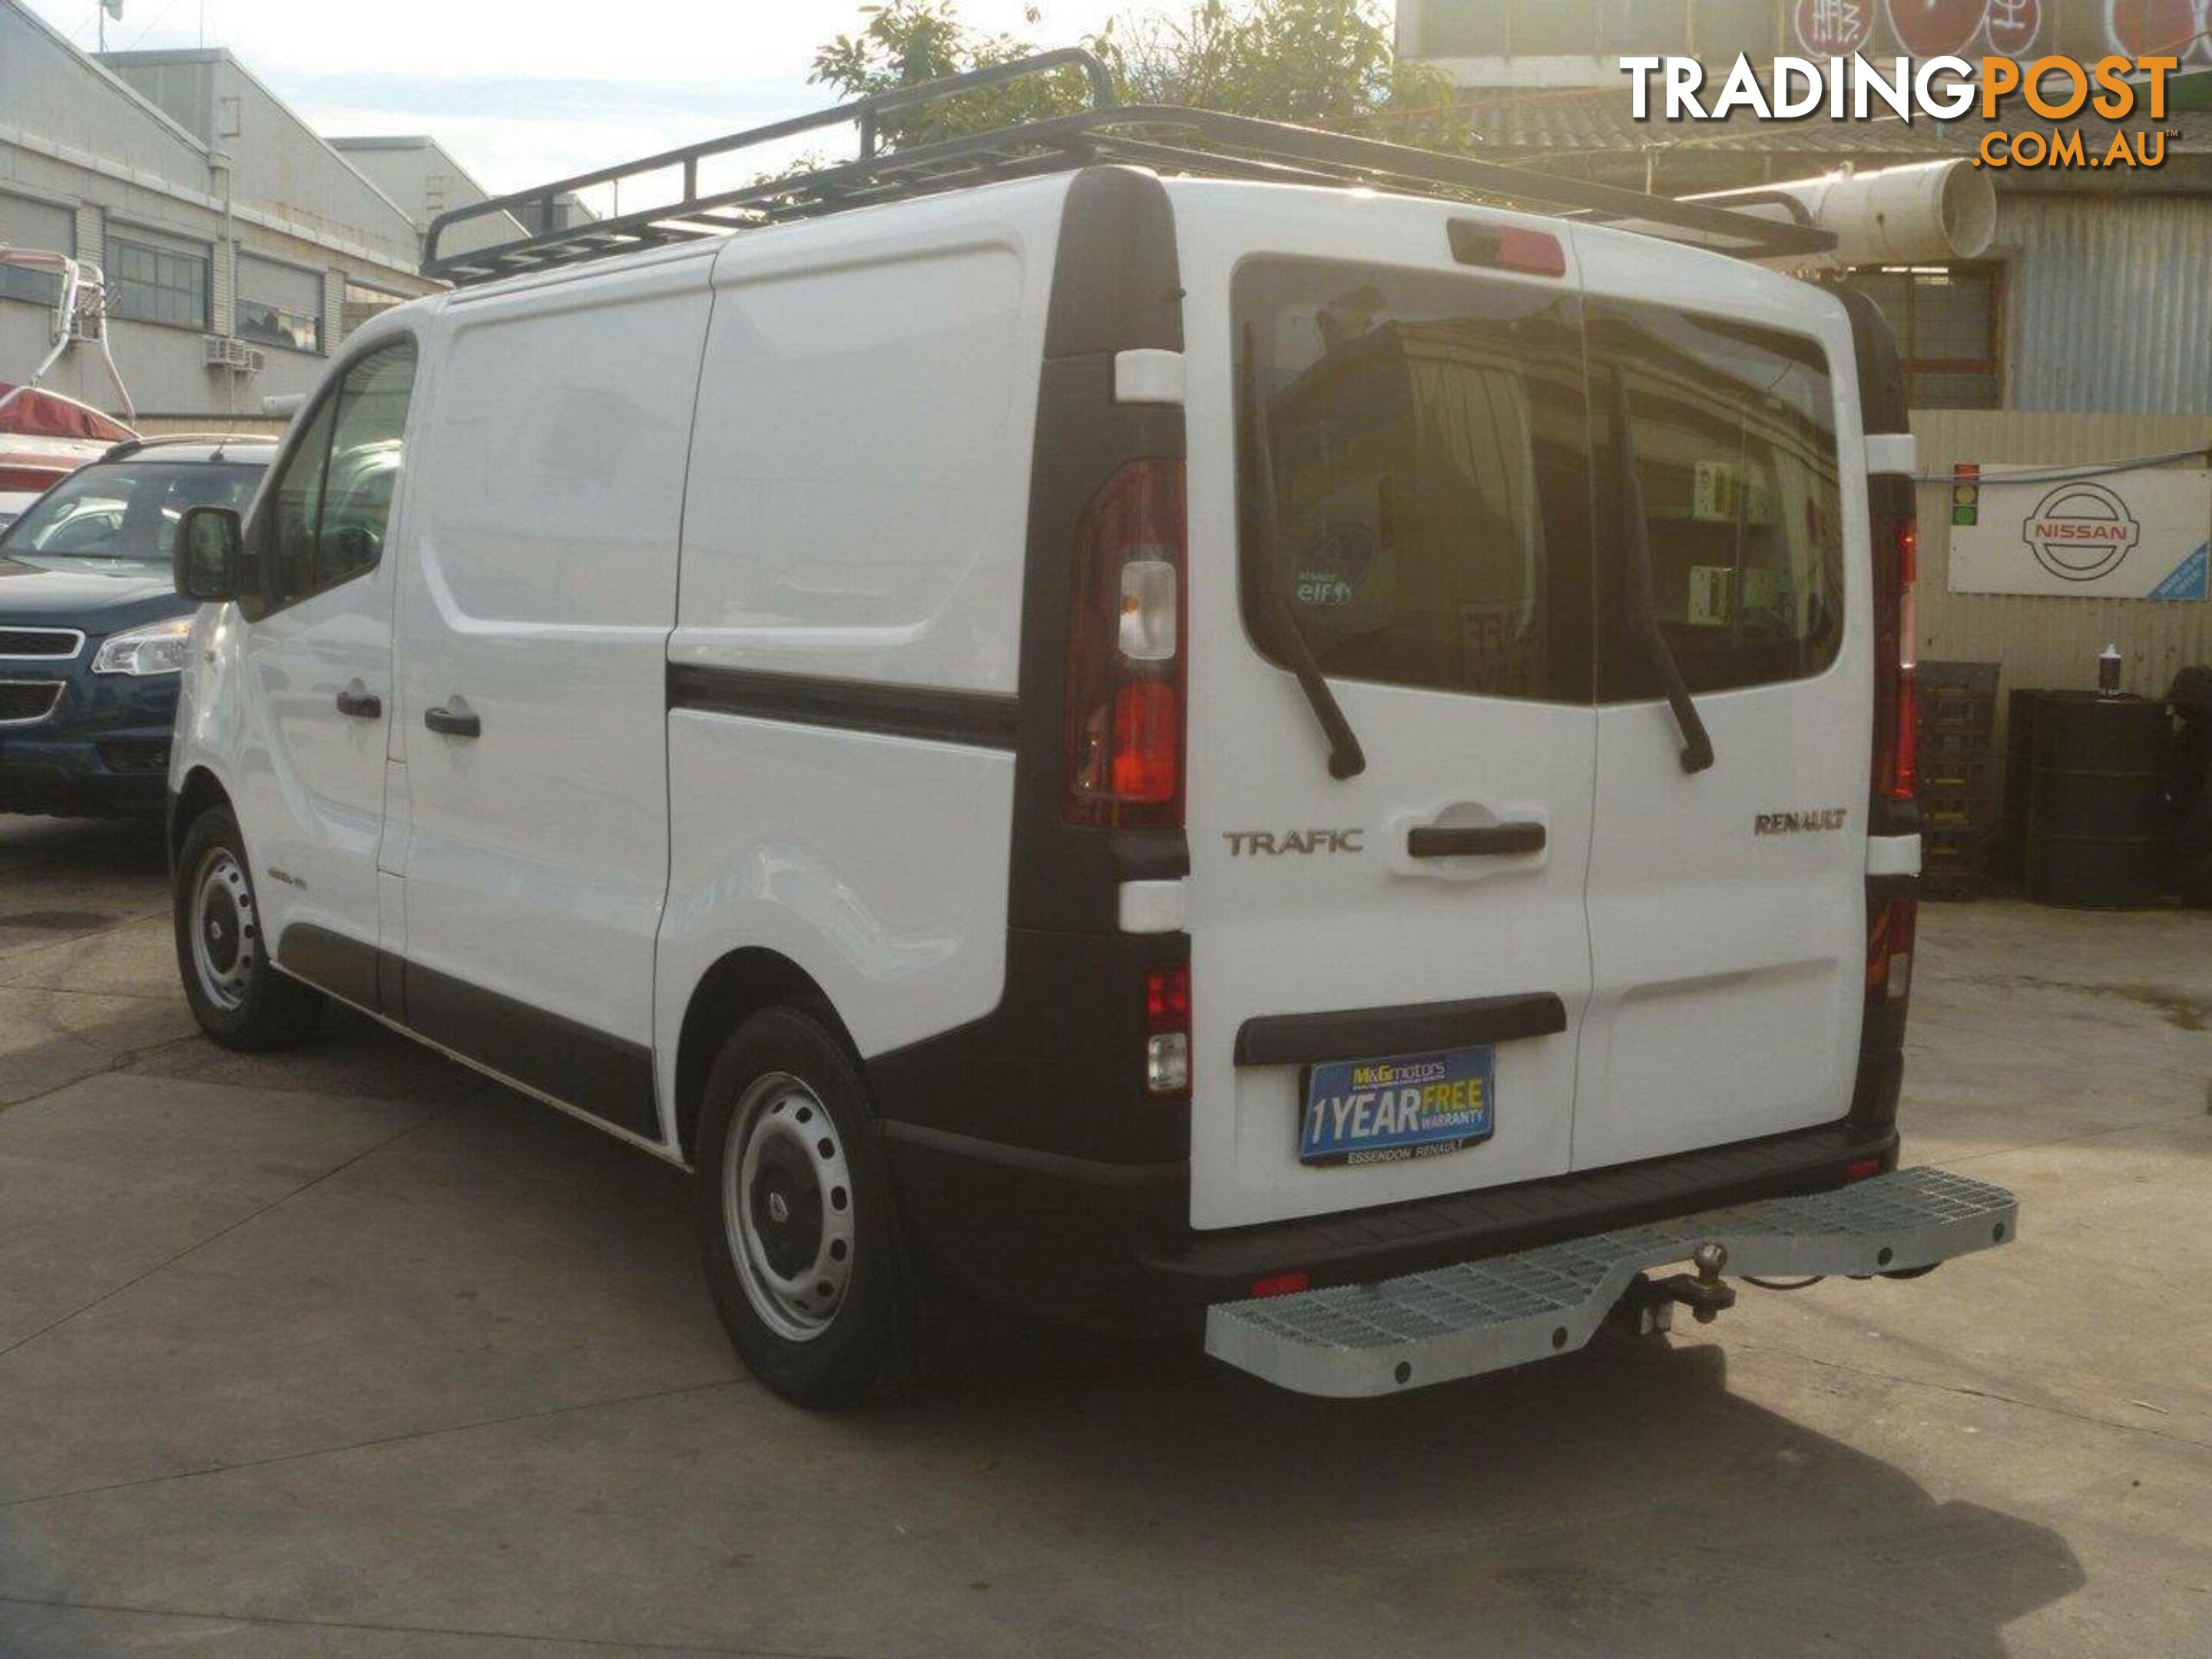 2015 RENAULT TRAFIC SWB X82 COMMERCIAL